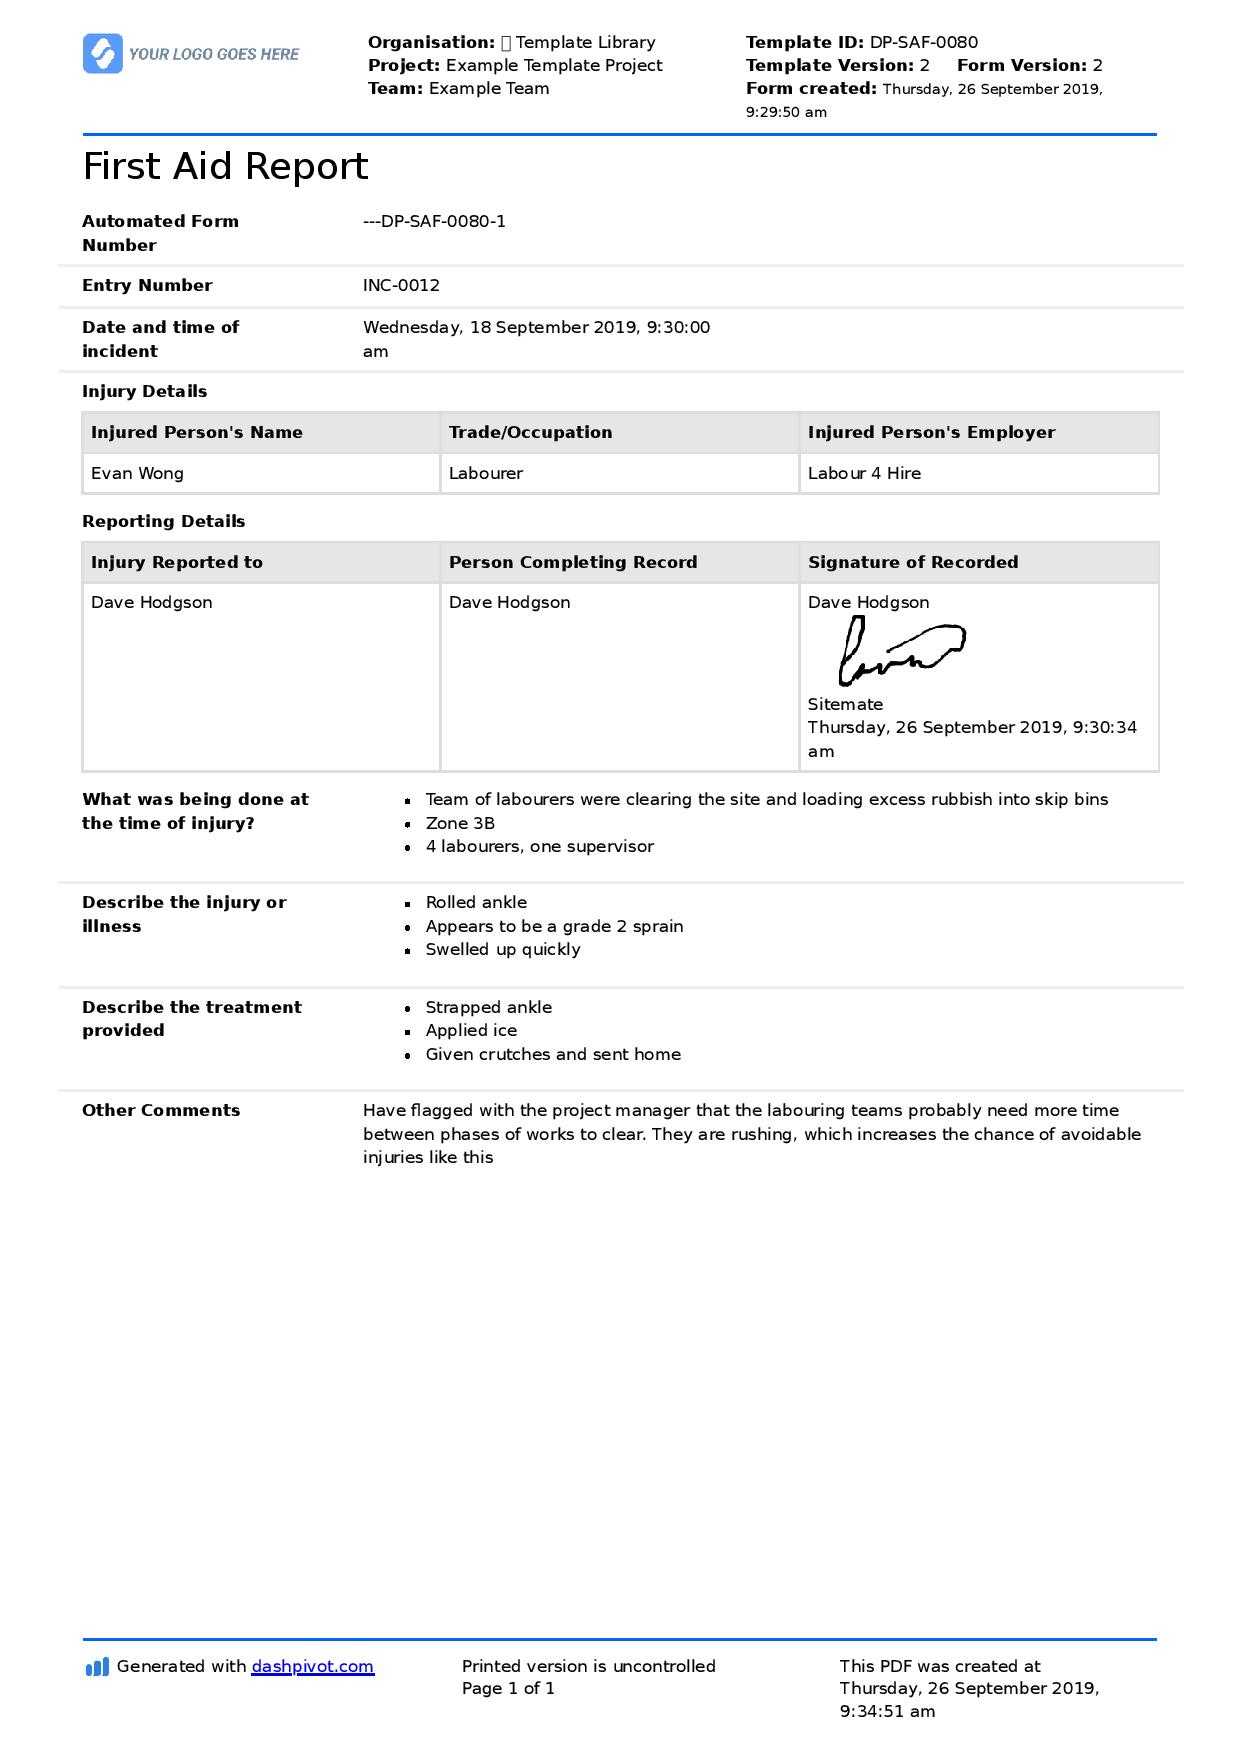 First Aid Report Form Template (Free To Use, Better Than Pdf) Within First Aid Incident Report Form Template